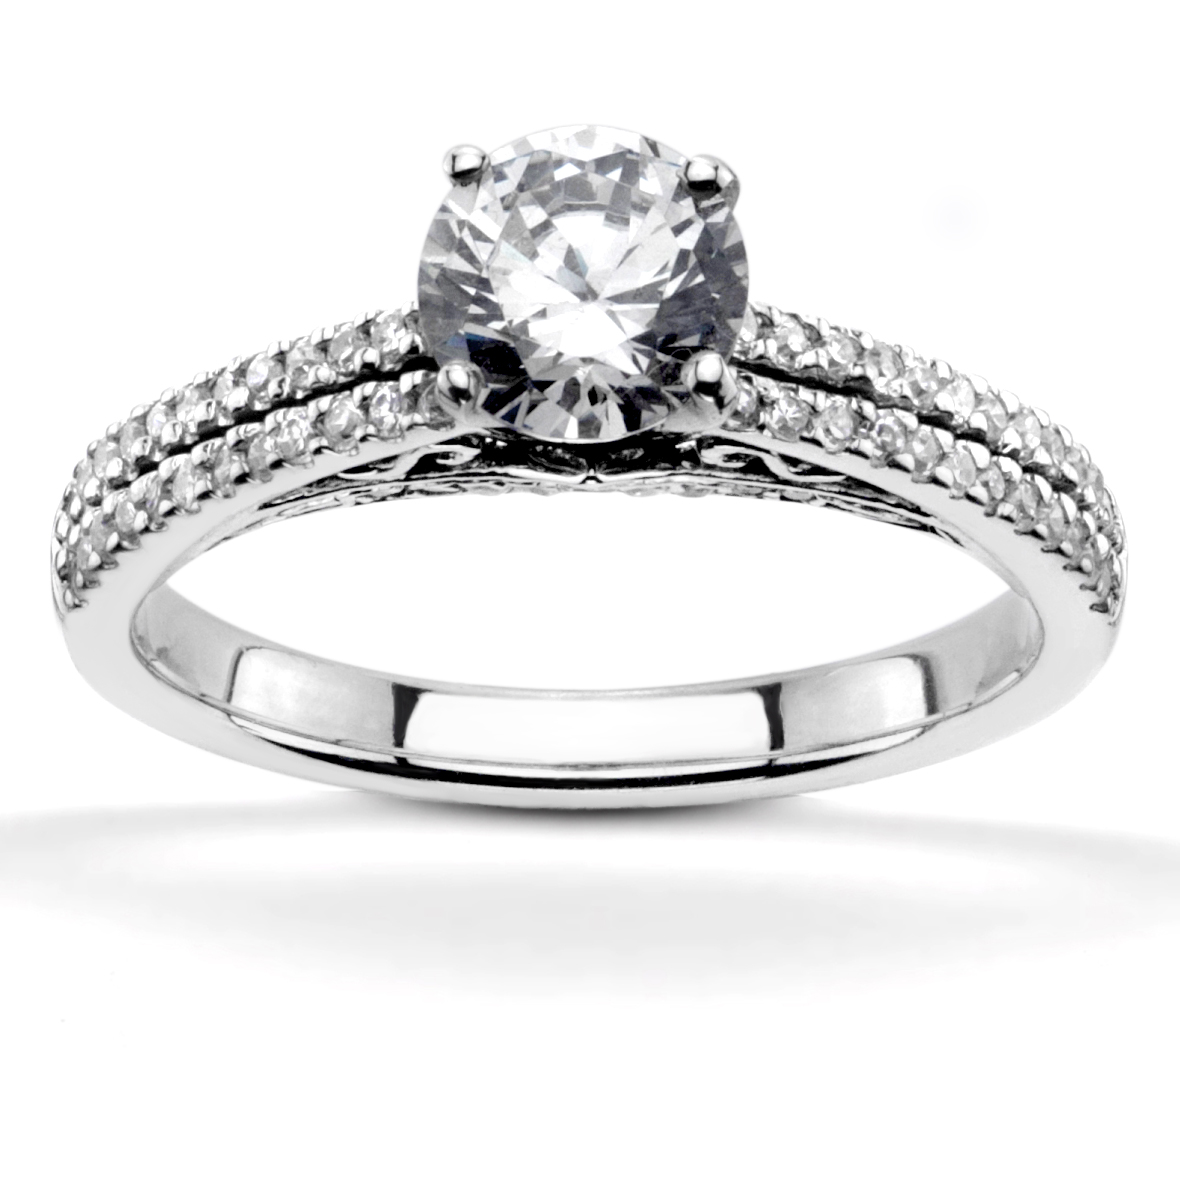 Pave Set Low Cathedral Diamond Engagement Ring (1/3 ct. t.w.)